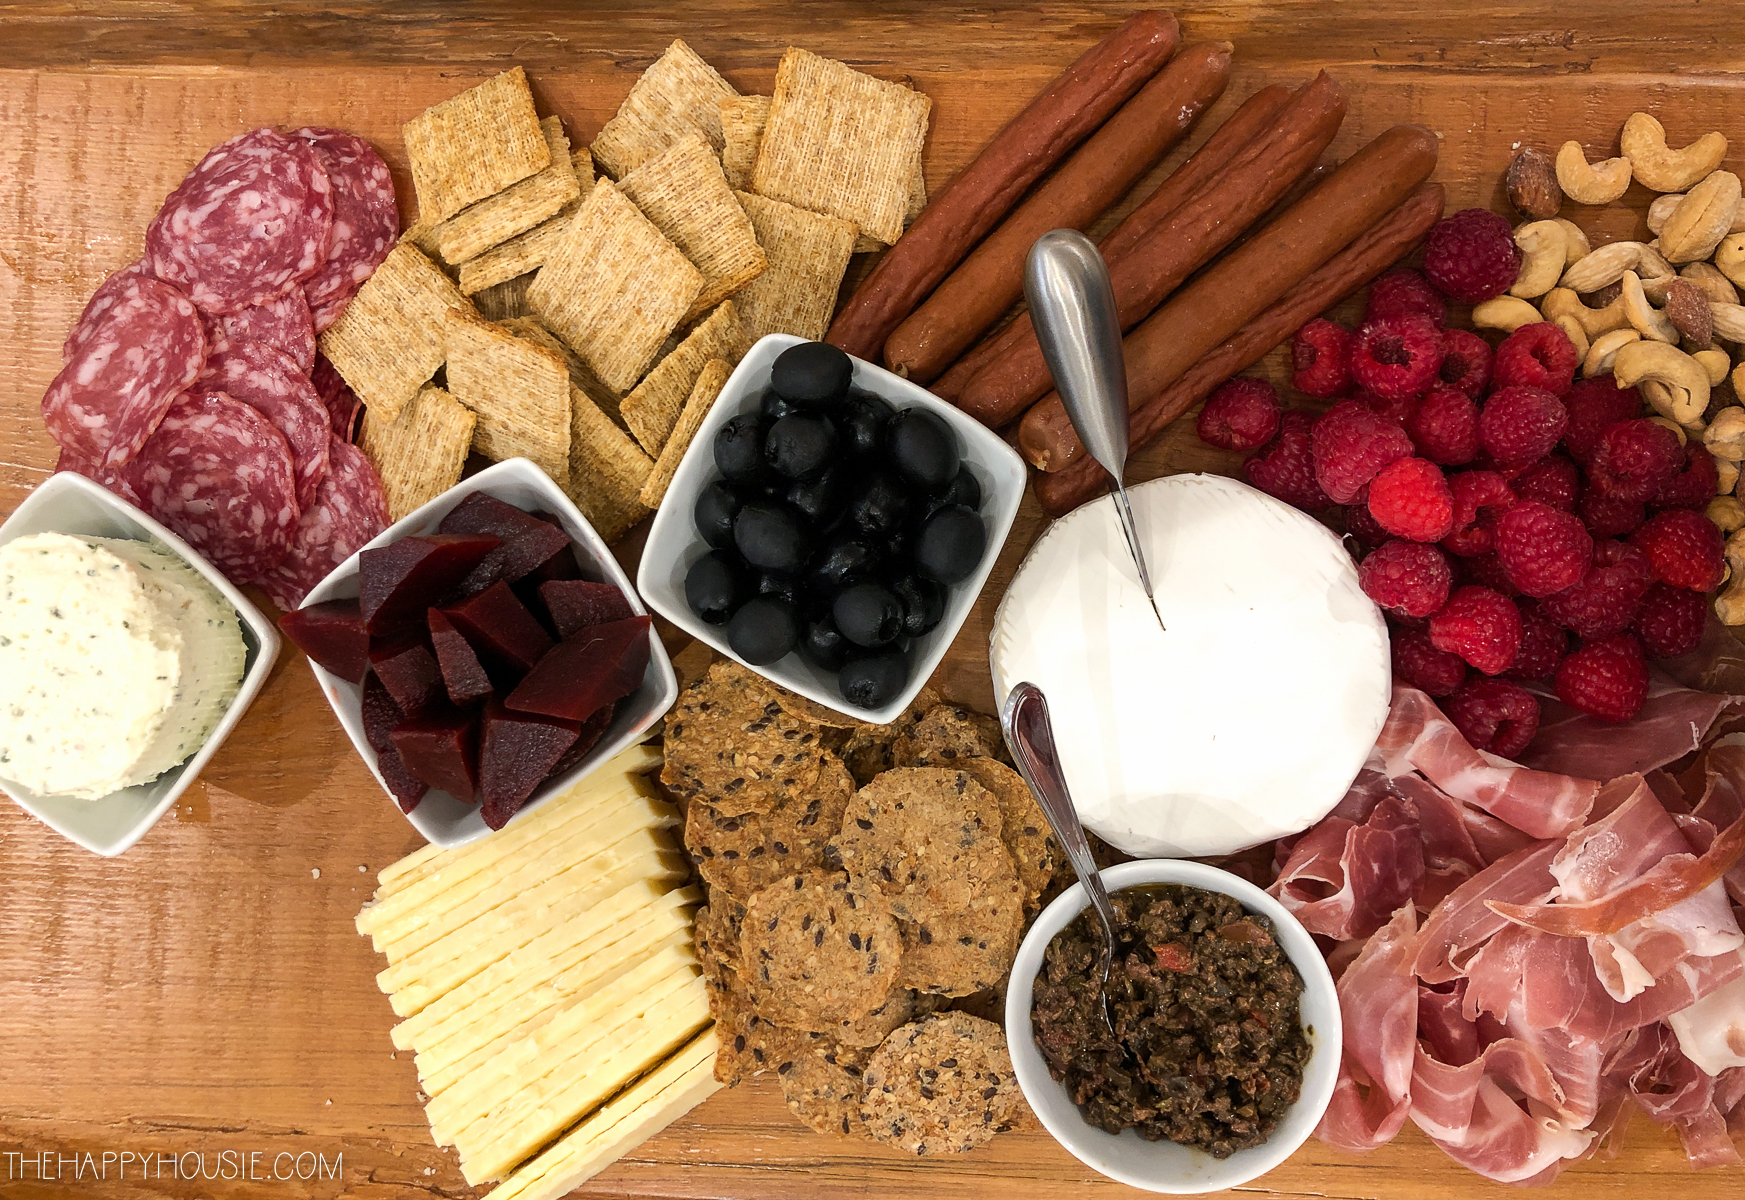 The charcuterie board with crackers and berries on it.